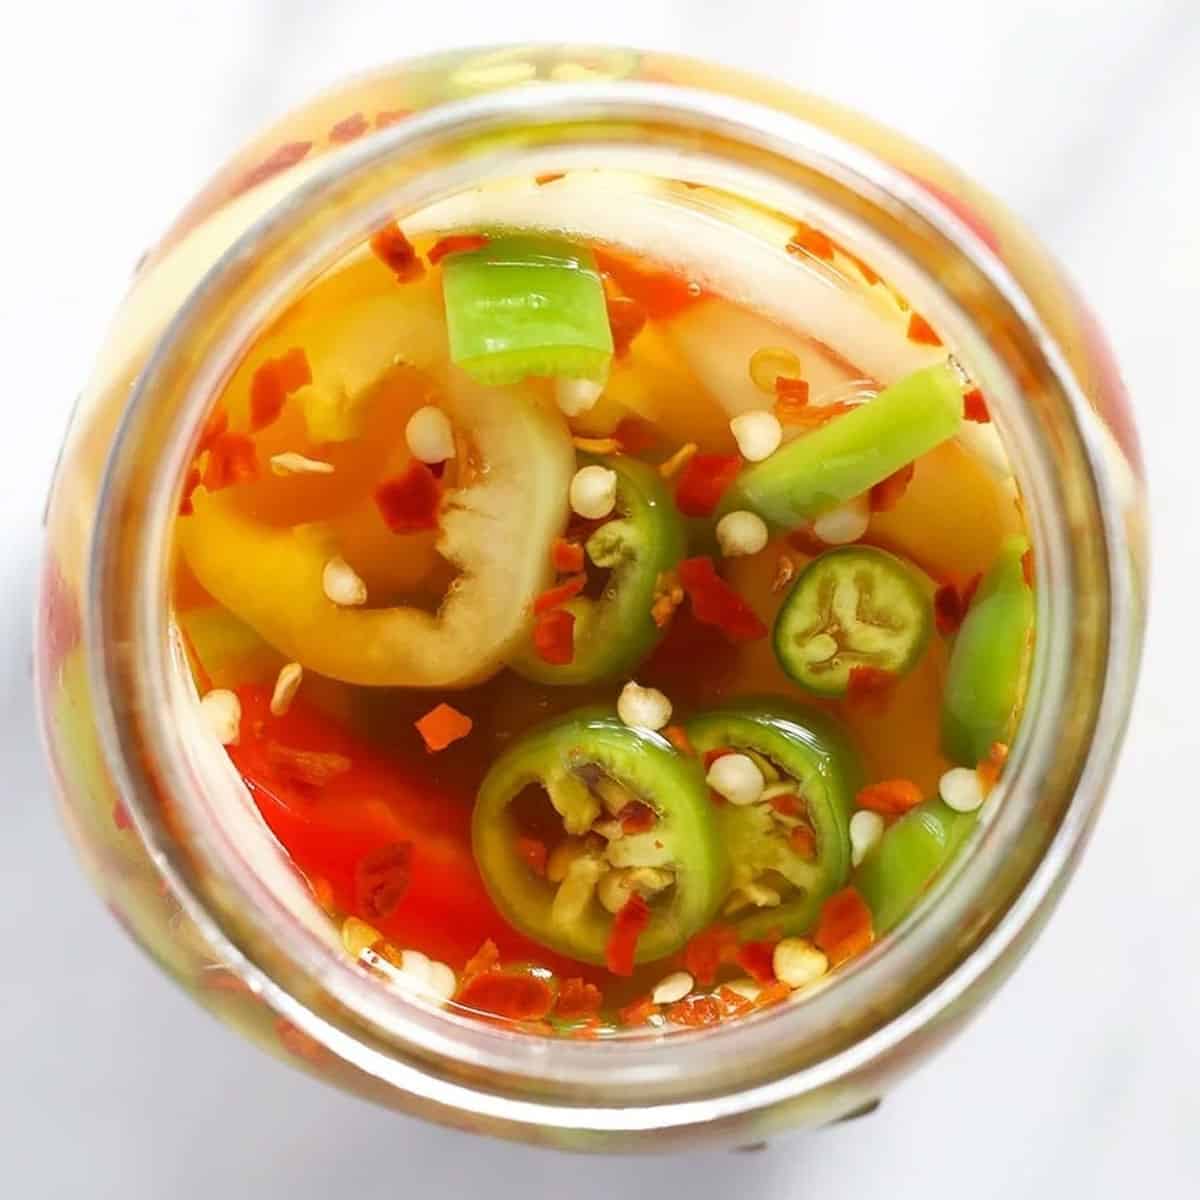 https://fitfoodiefinds.com/wp-content/uploads/2020/08/peppers6-1.jpg